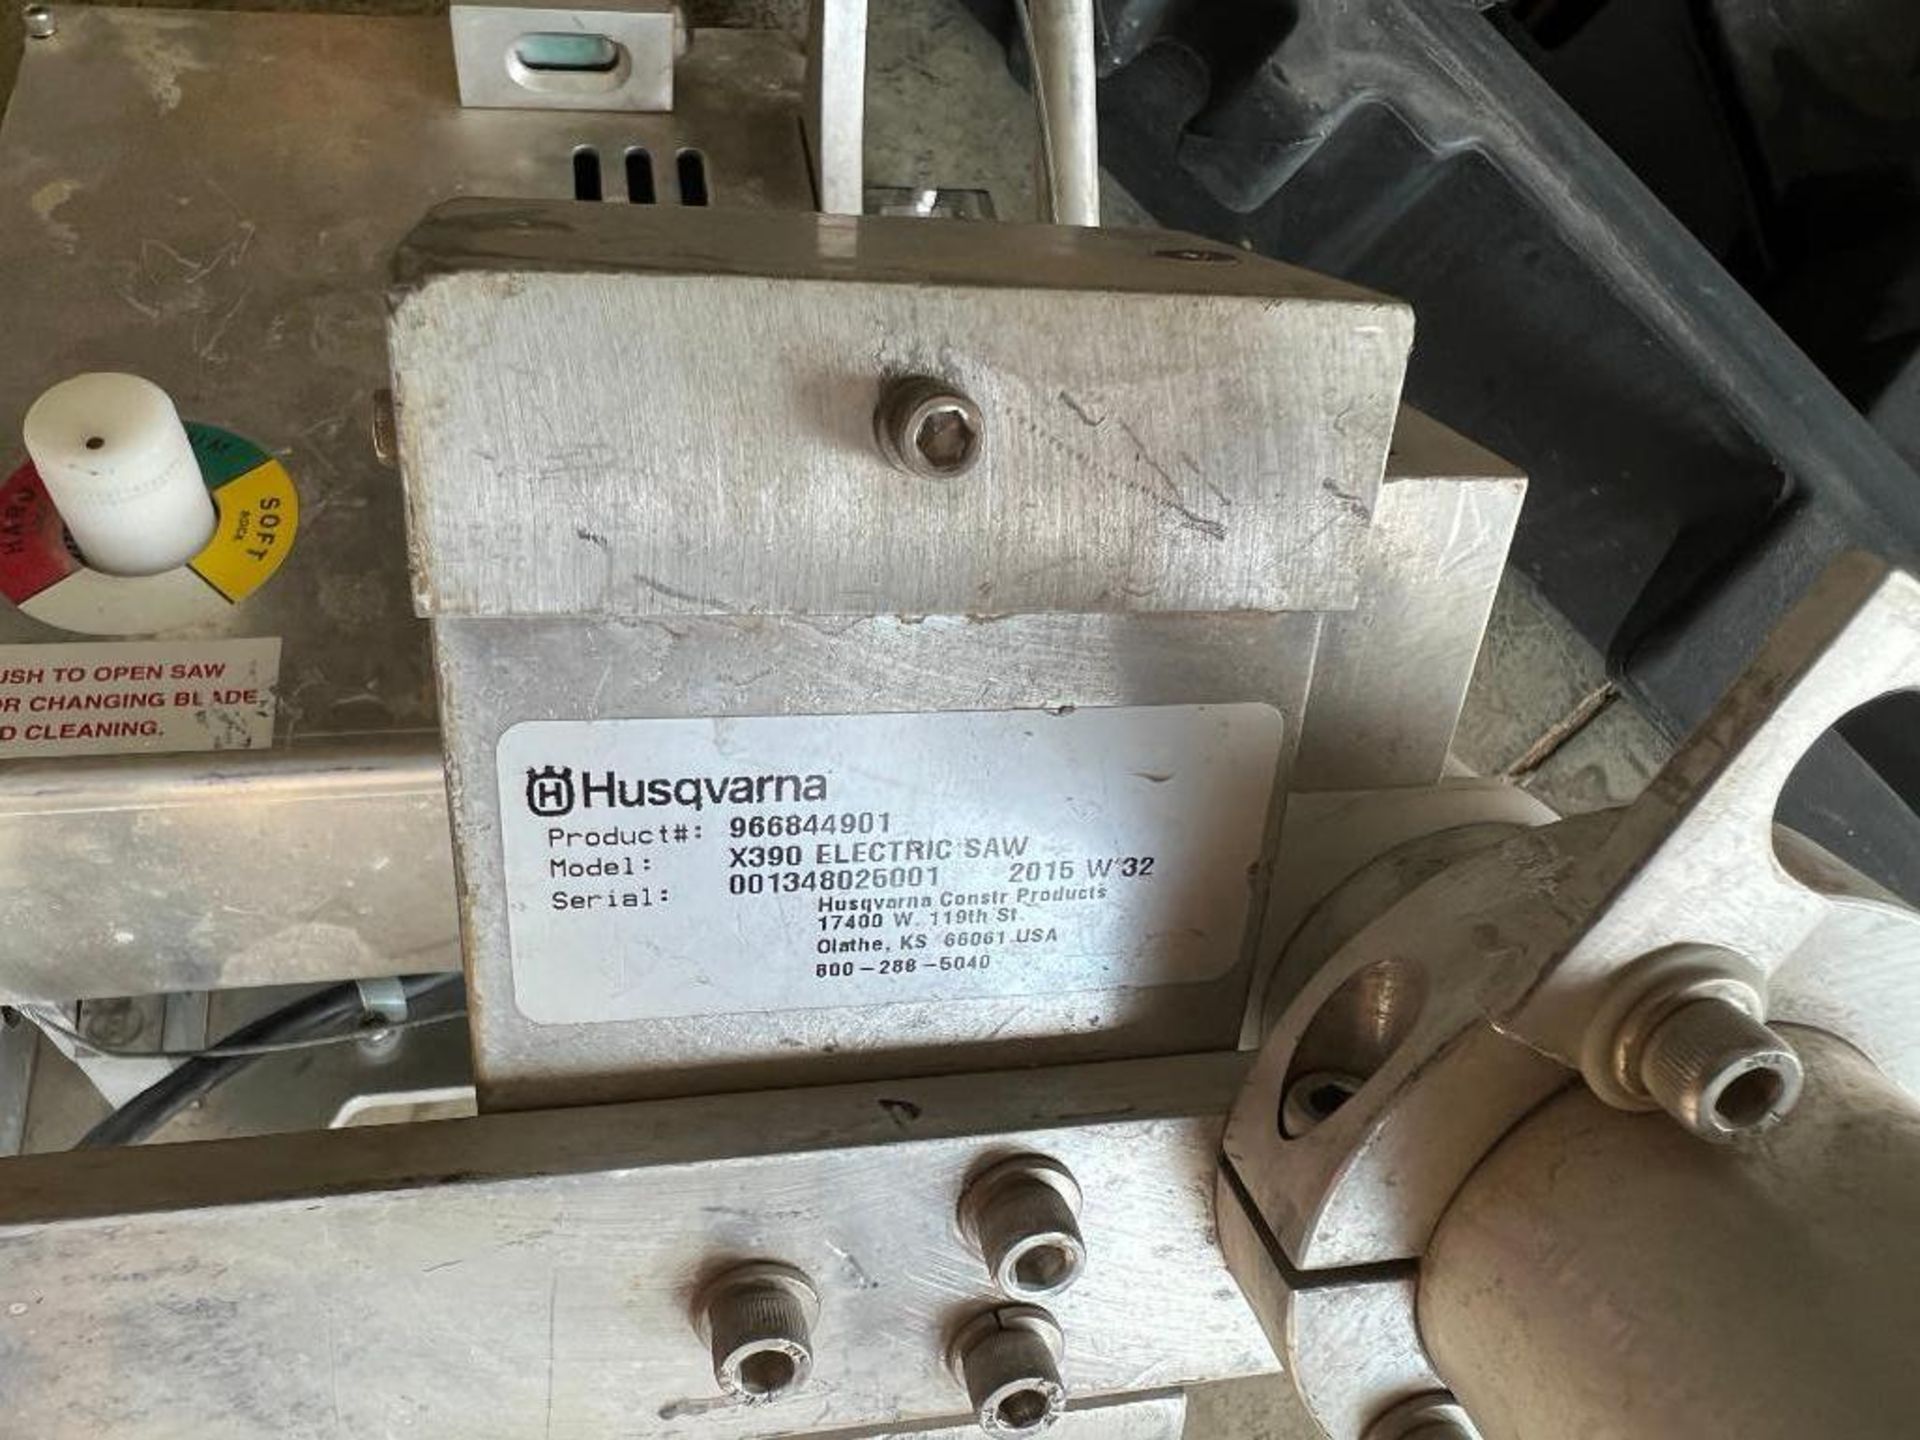 Husqvarna X390 Electric Saw, Serial #001348026001.  Located in Altamont, IL - Image 2 of 4